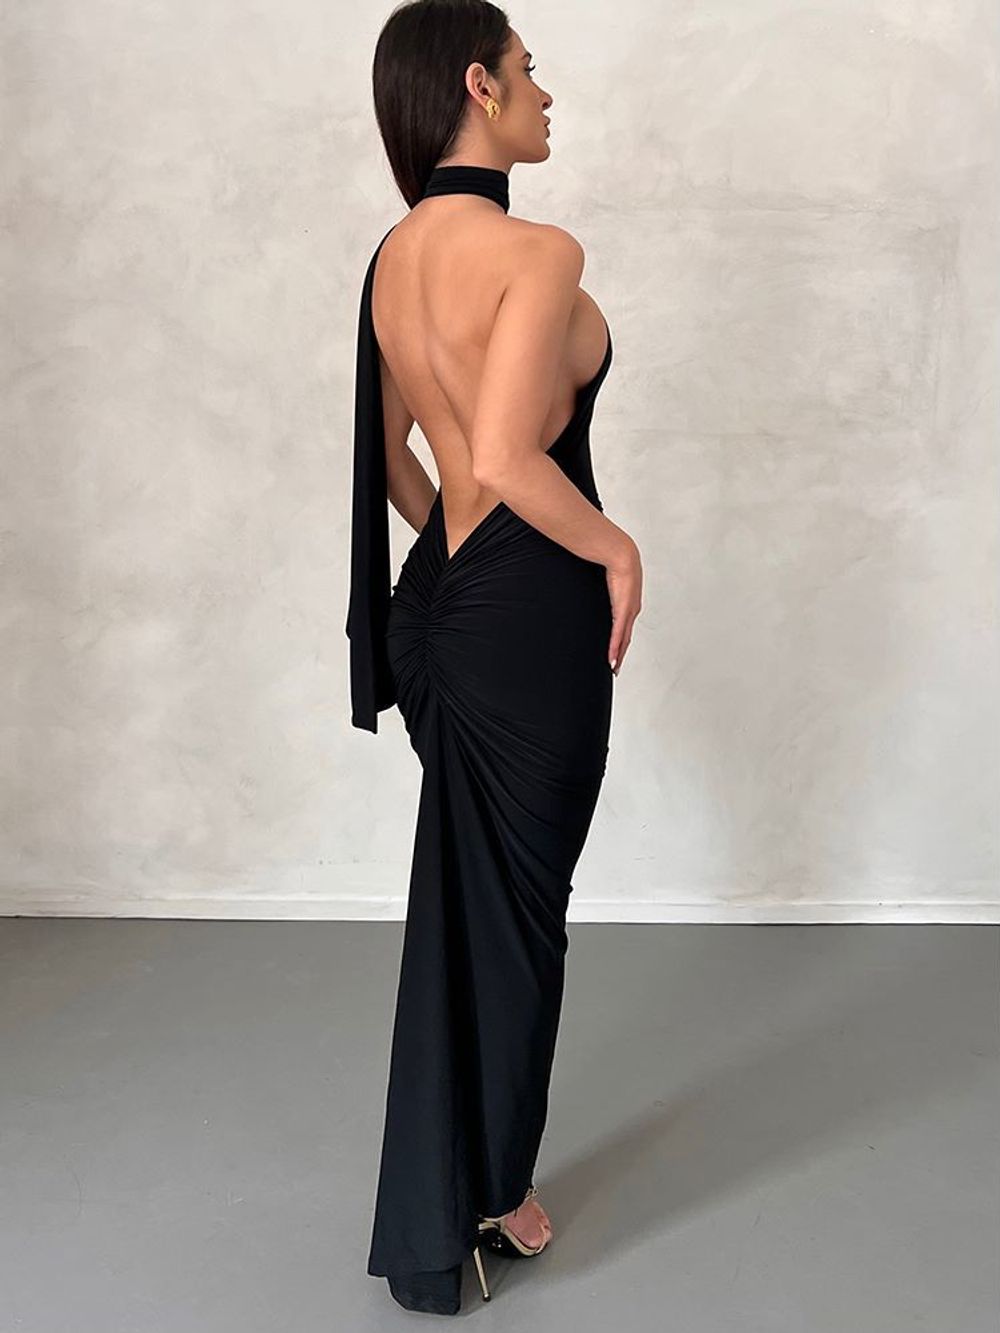 Halter Ruched Backless Sleeveless Maxi Dress